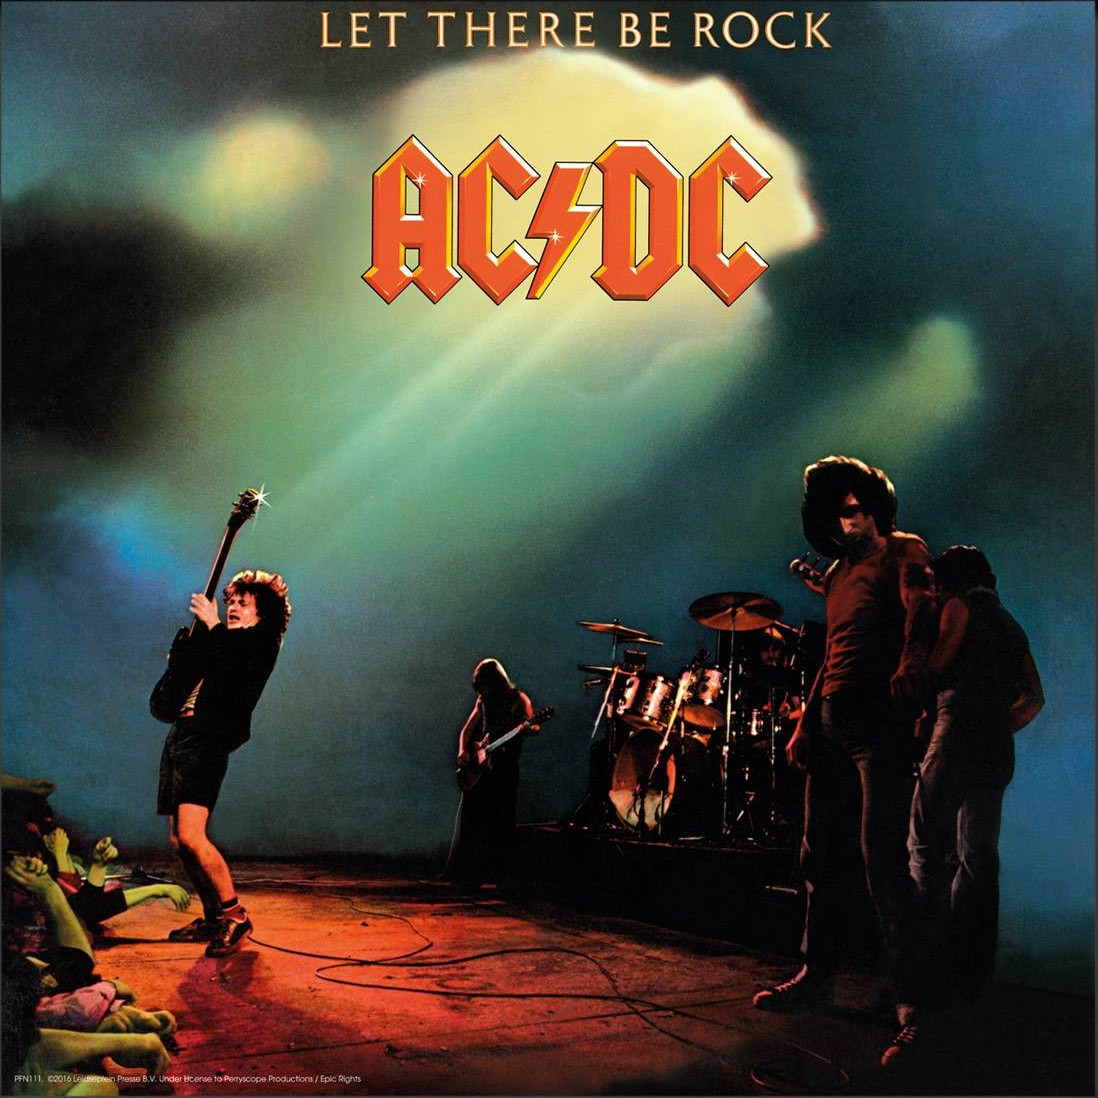 ACDC - Let There Be Rock